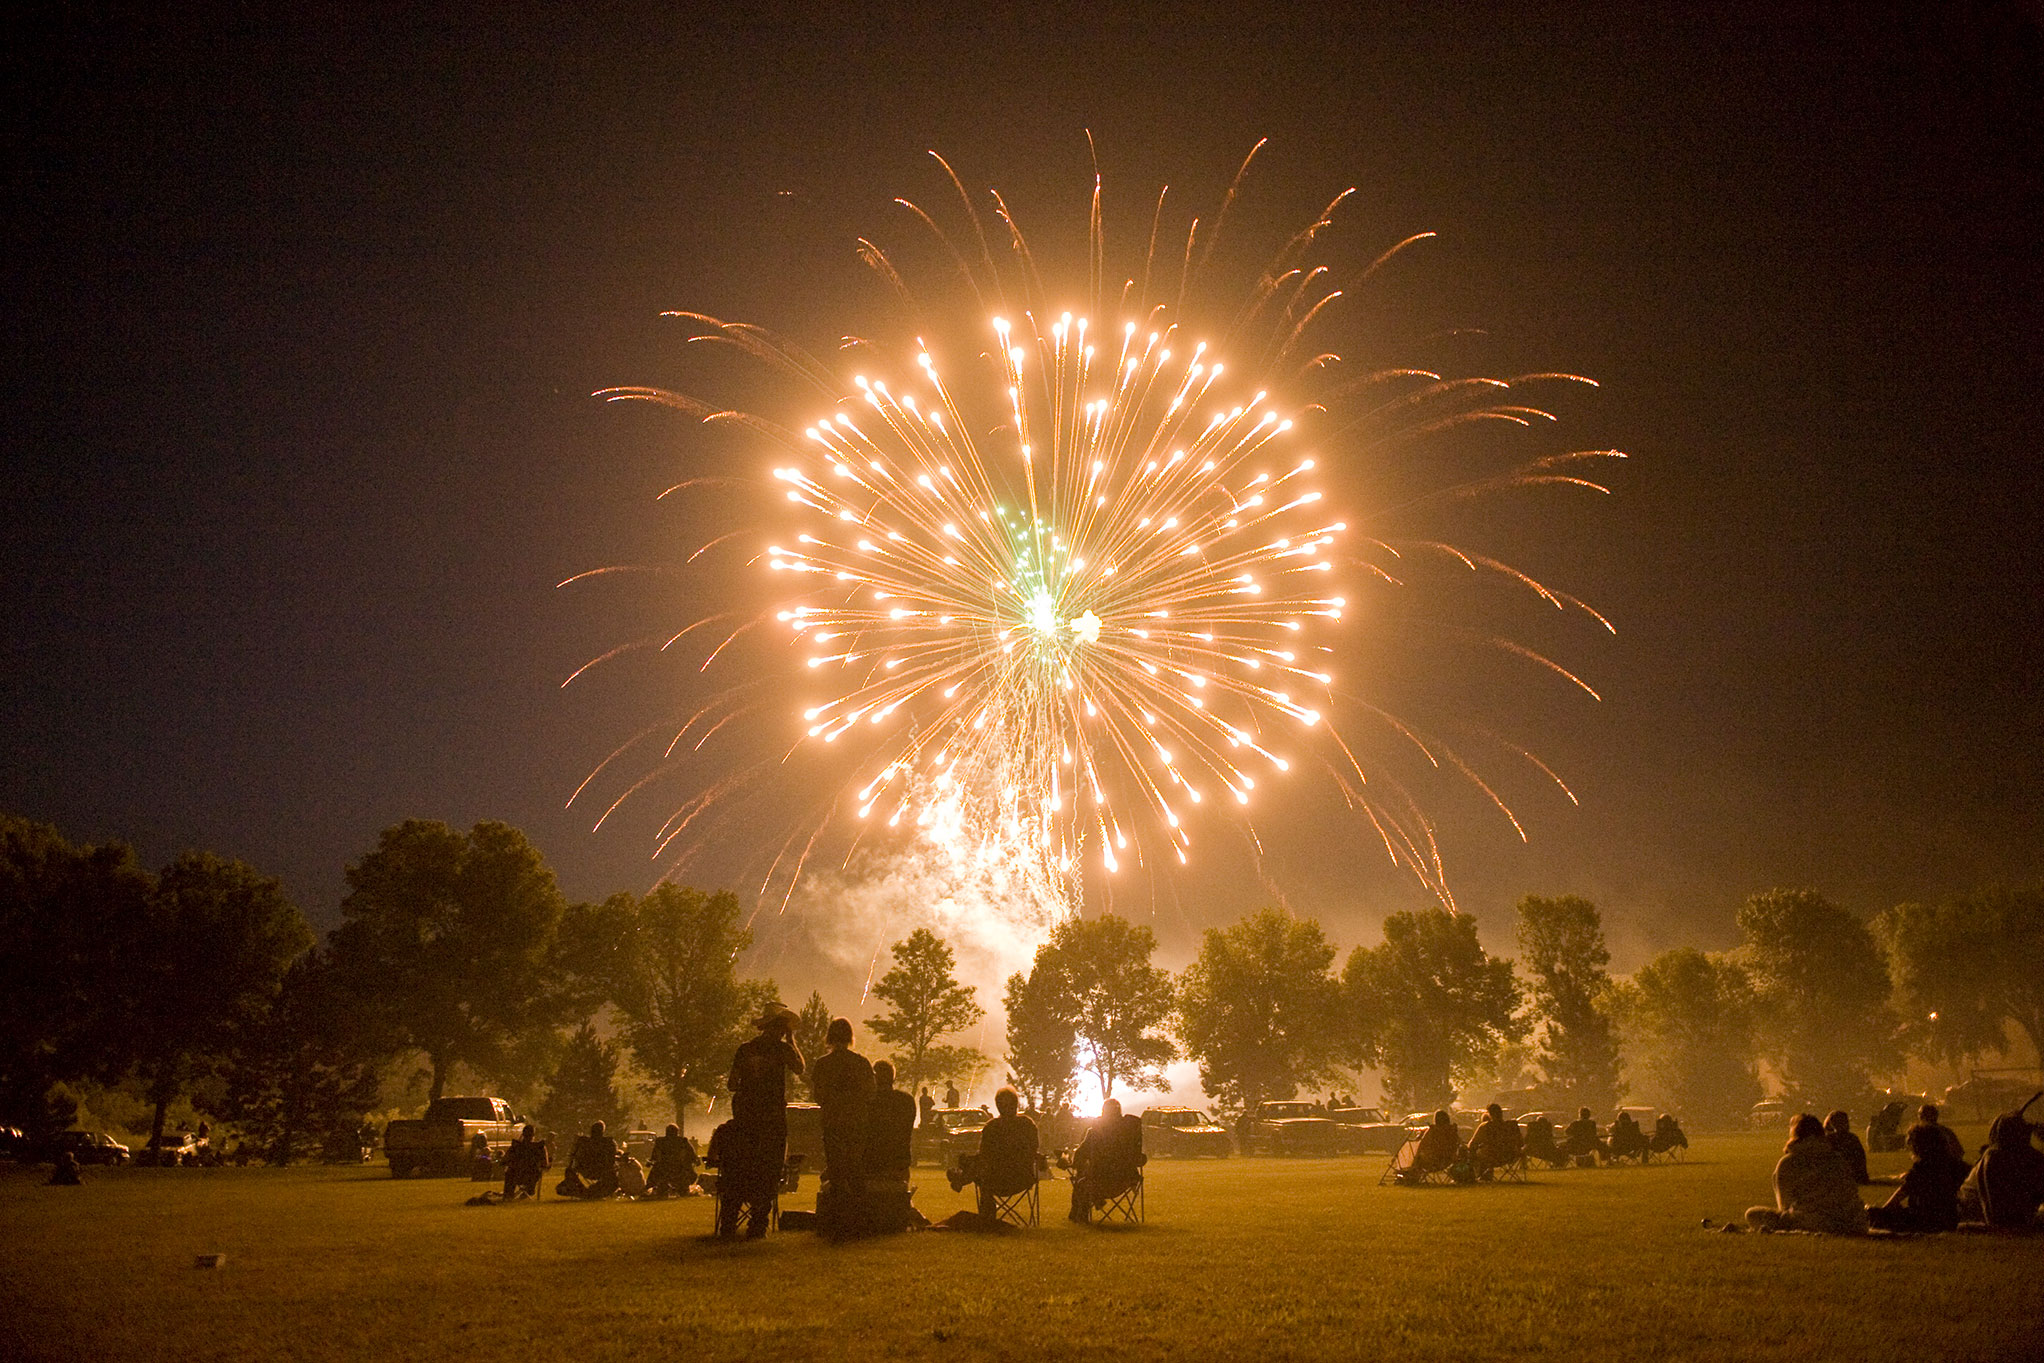 Large colorful fireworks photo